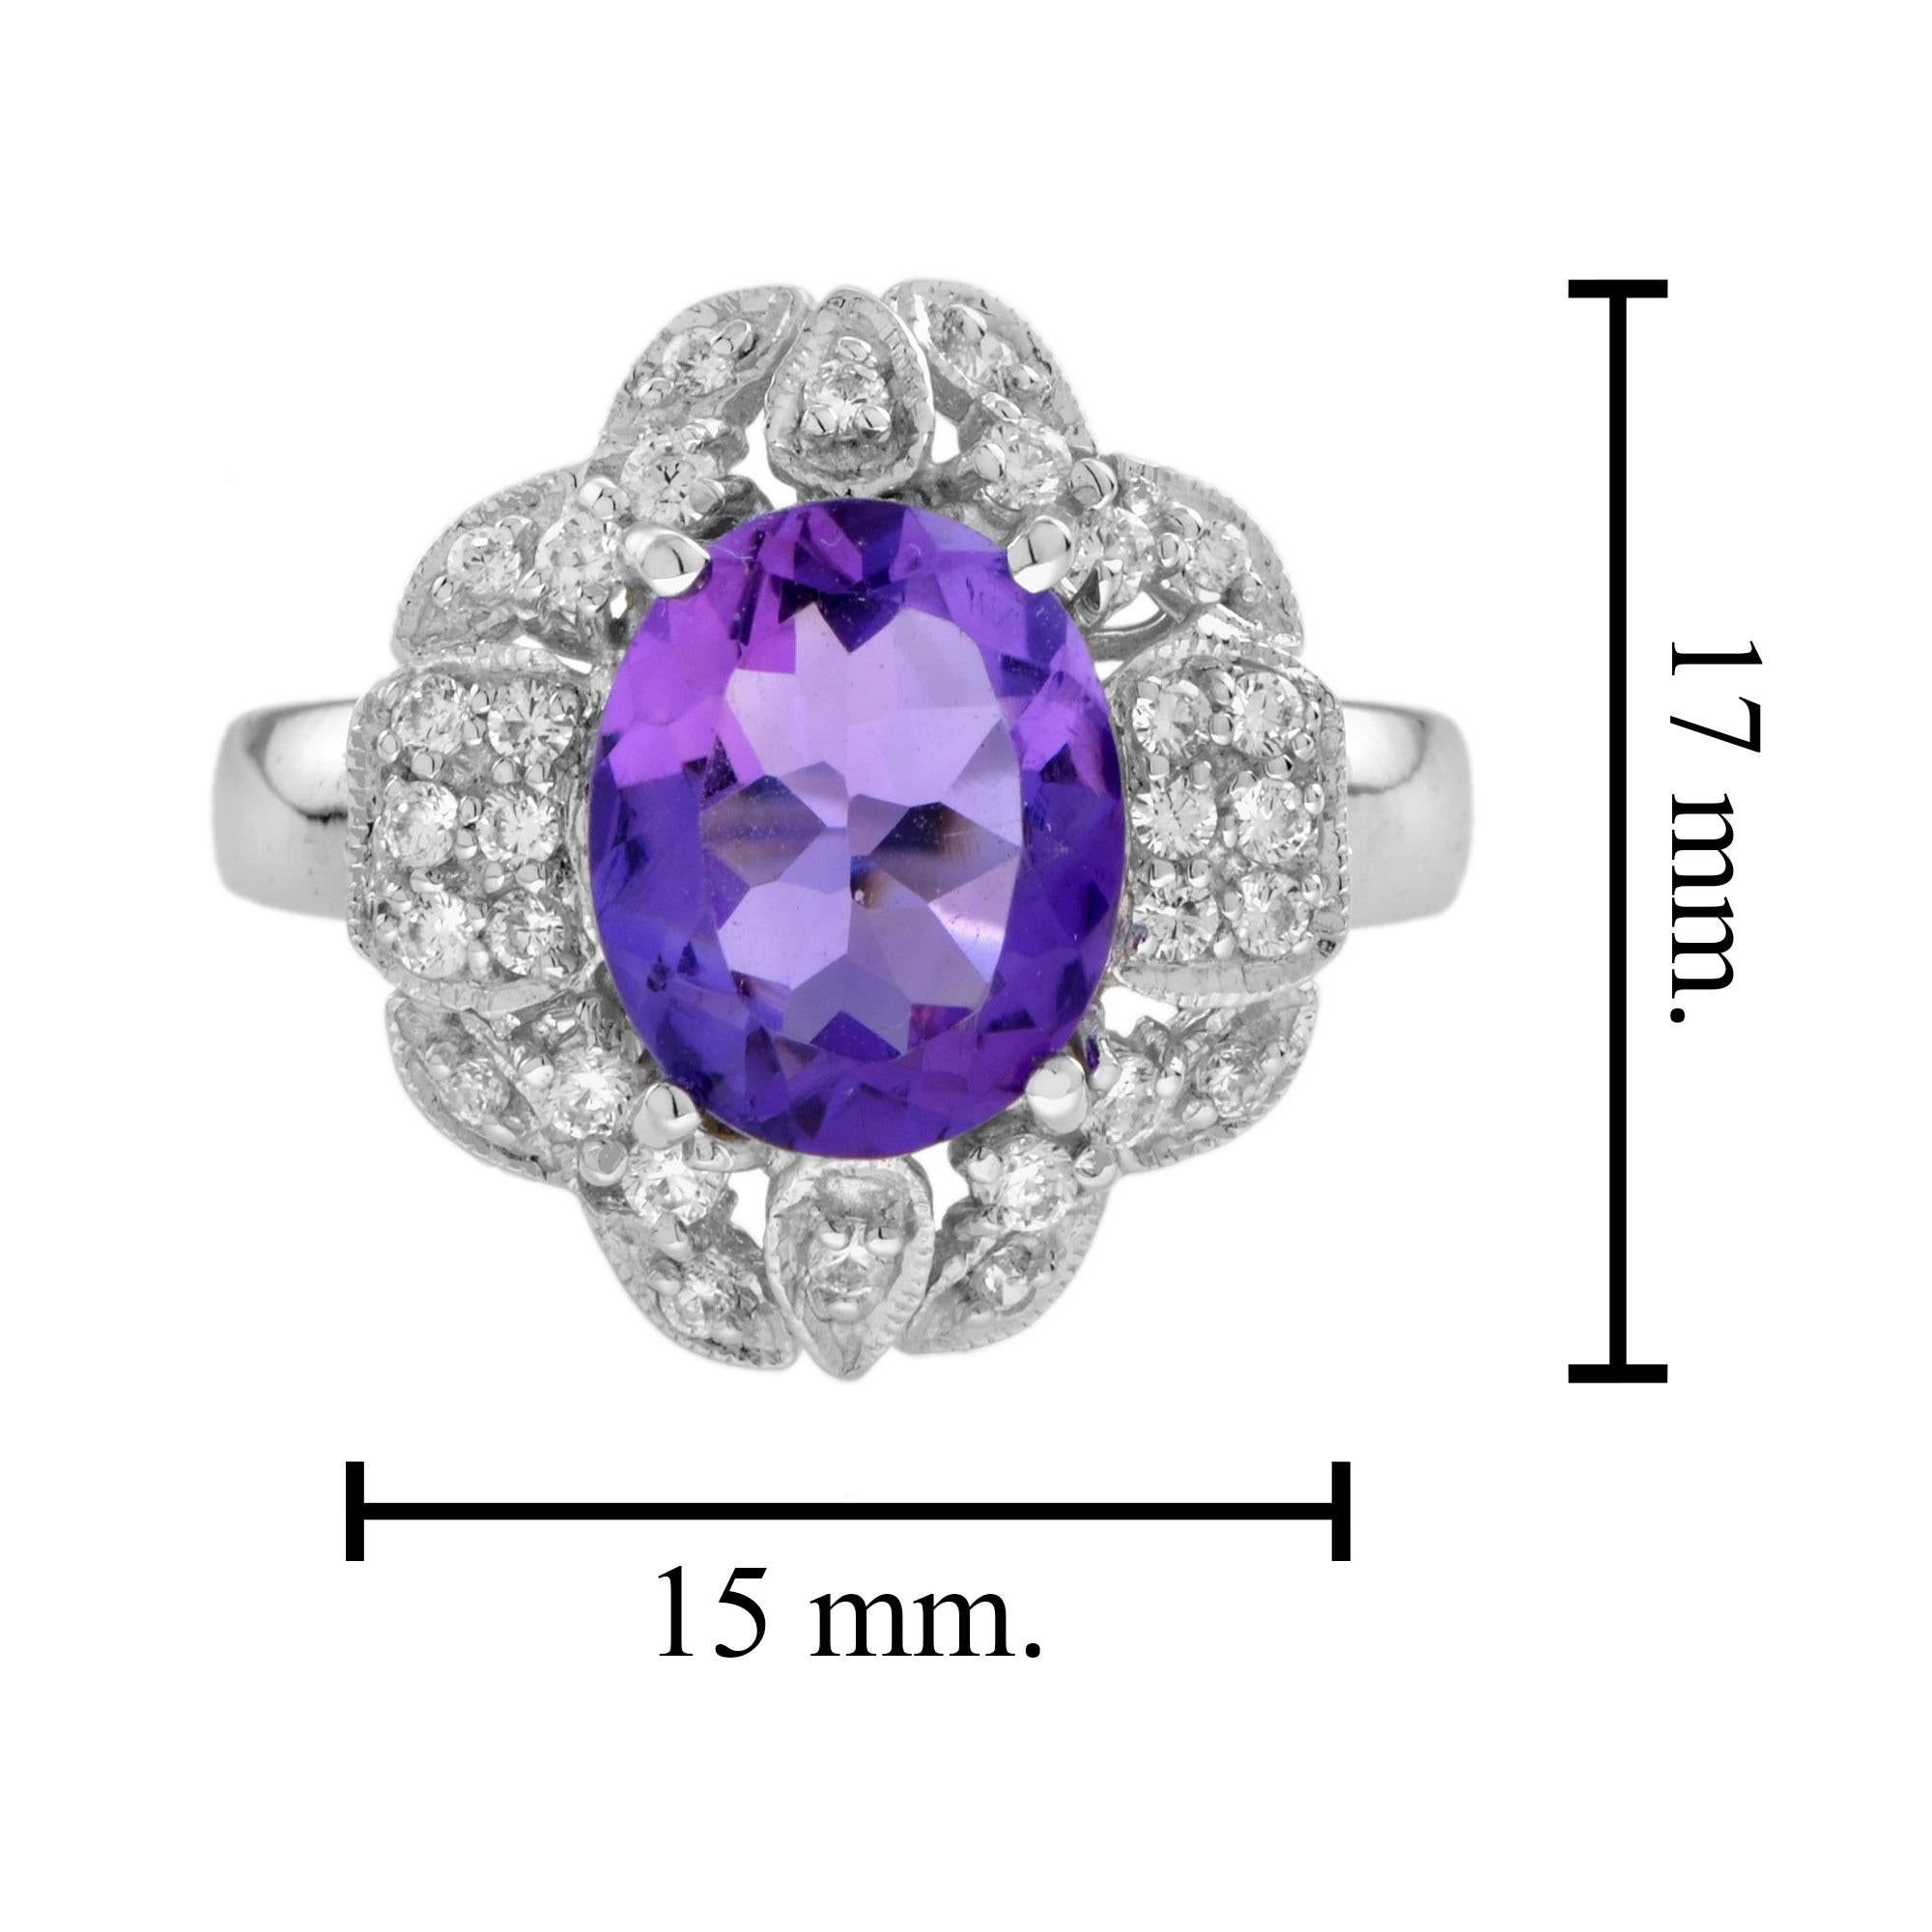 For Sale:  2.6 Ct. Amethyst and Diamond Halo Ring in 18K White Gold 6